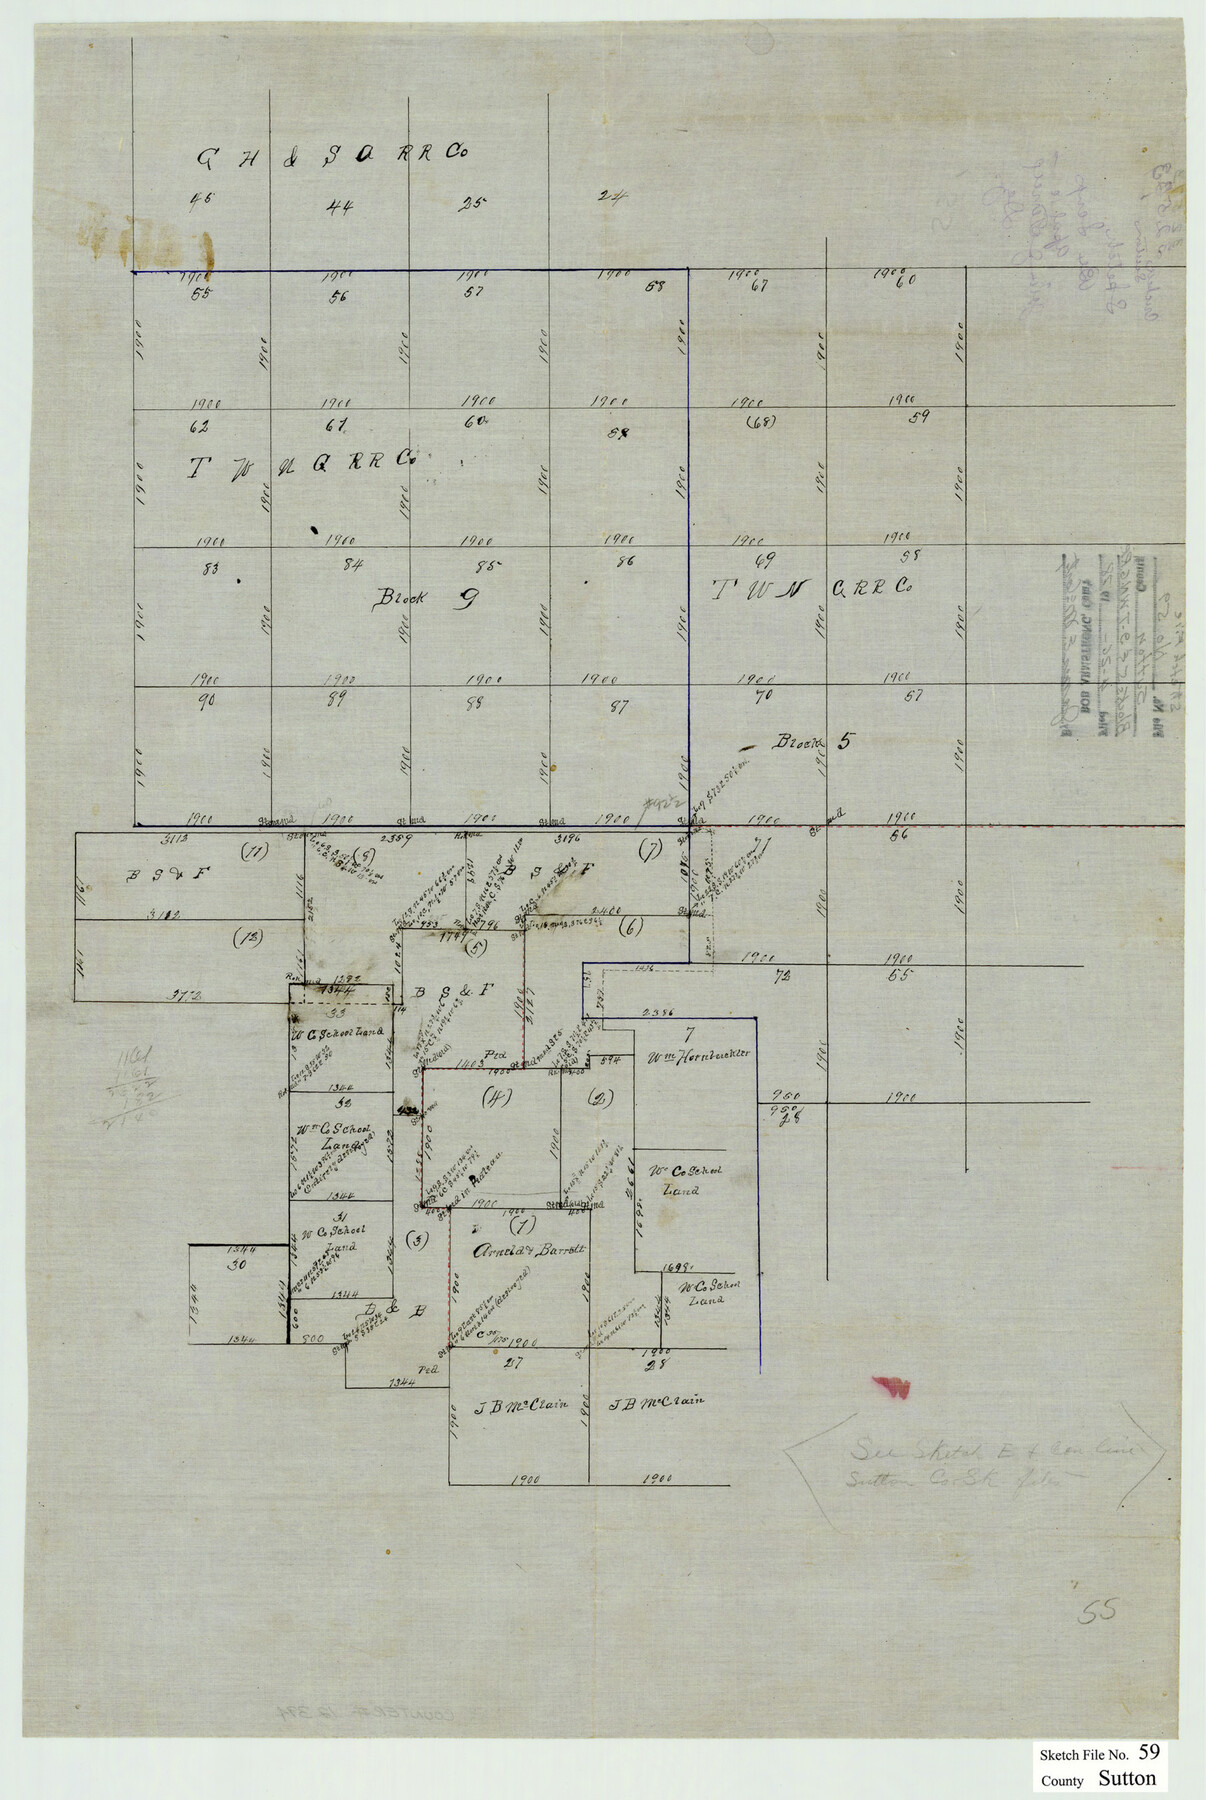 12394, Sutton County Sketch File 59, General Map Collection